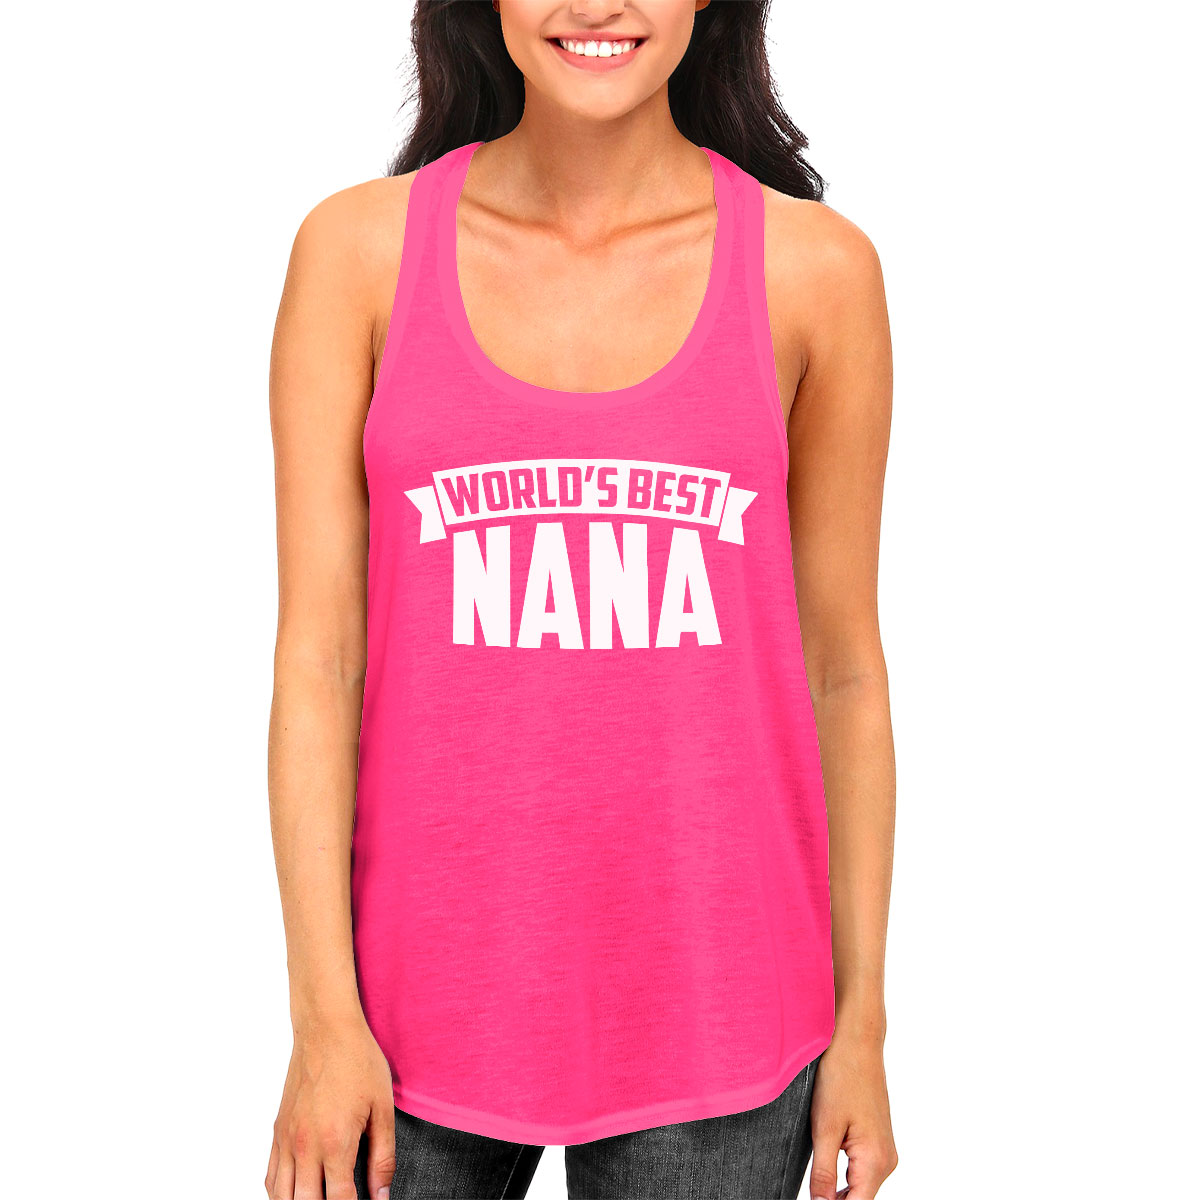 FLOWERS Woman Tank Top Racerback Hand Screen Print Mother's Day Grandma For Her 